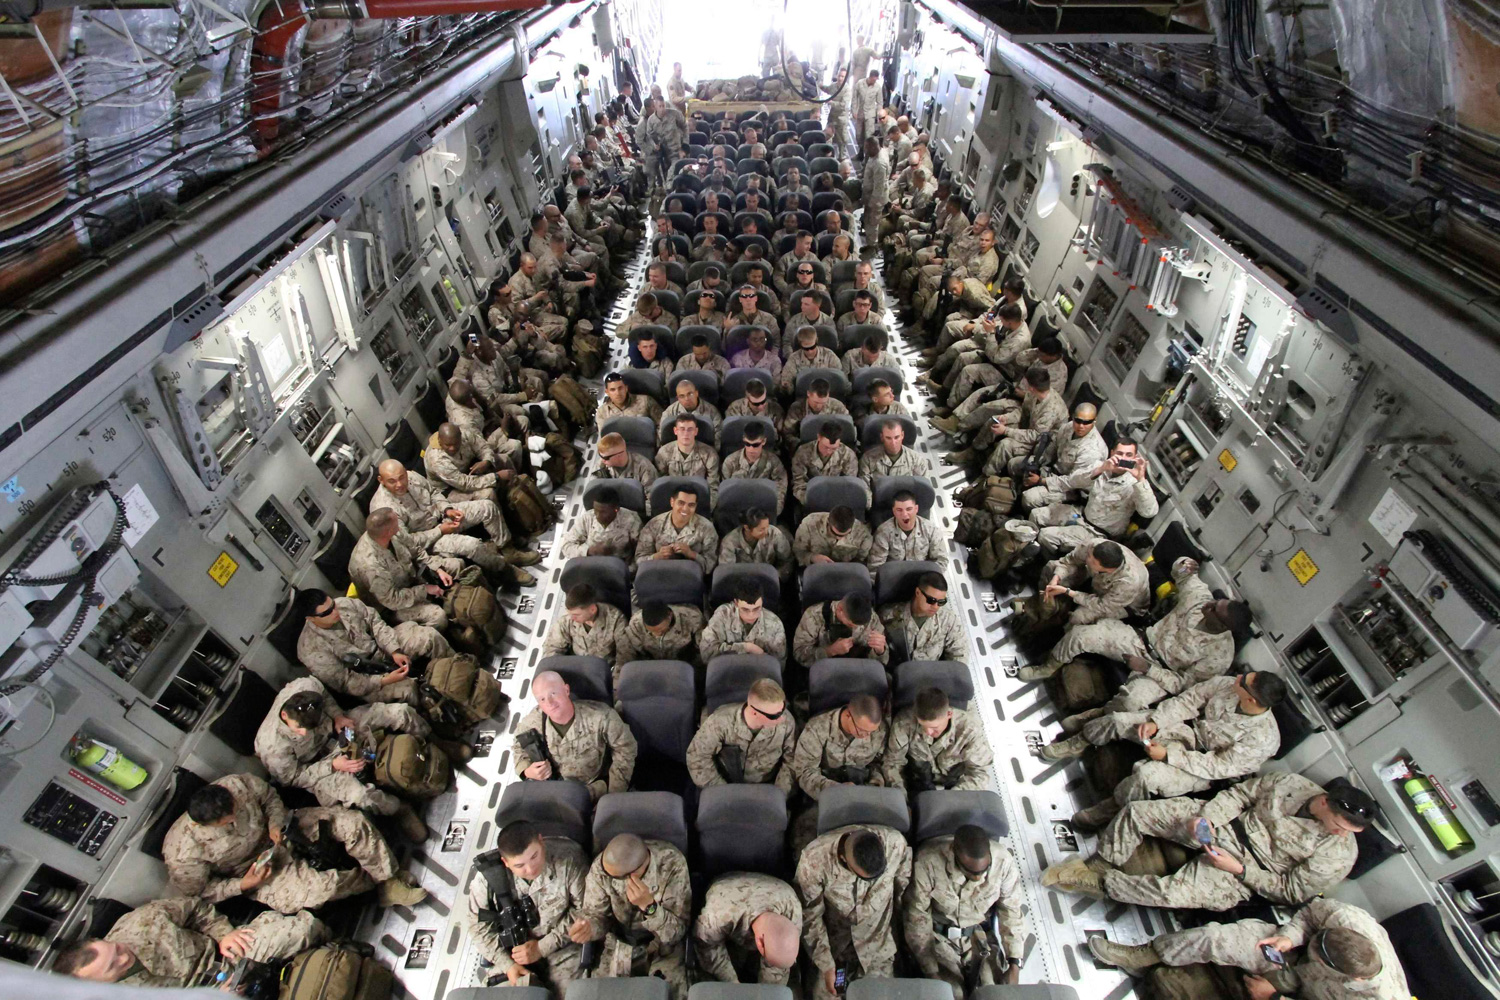 March 27, 2012. U.S. servicemen sit after boarding a transport plane before leaving for Afghanistan at the U.S. transit center at Manas airport near Bishkek, Kyrgyzstan.